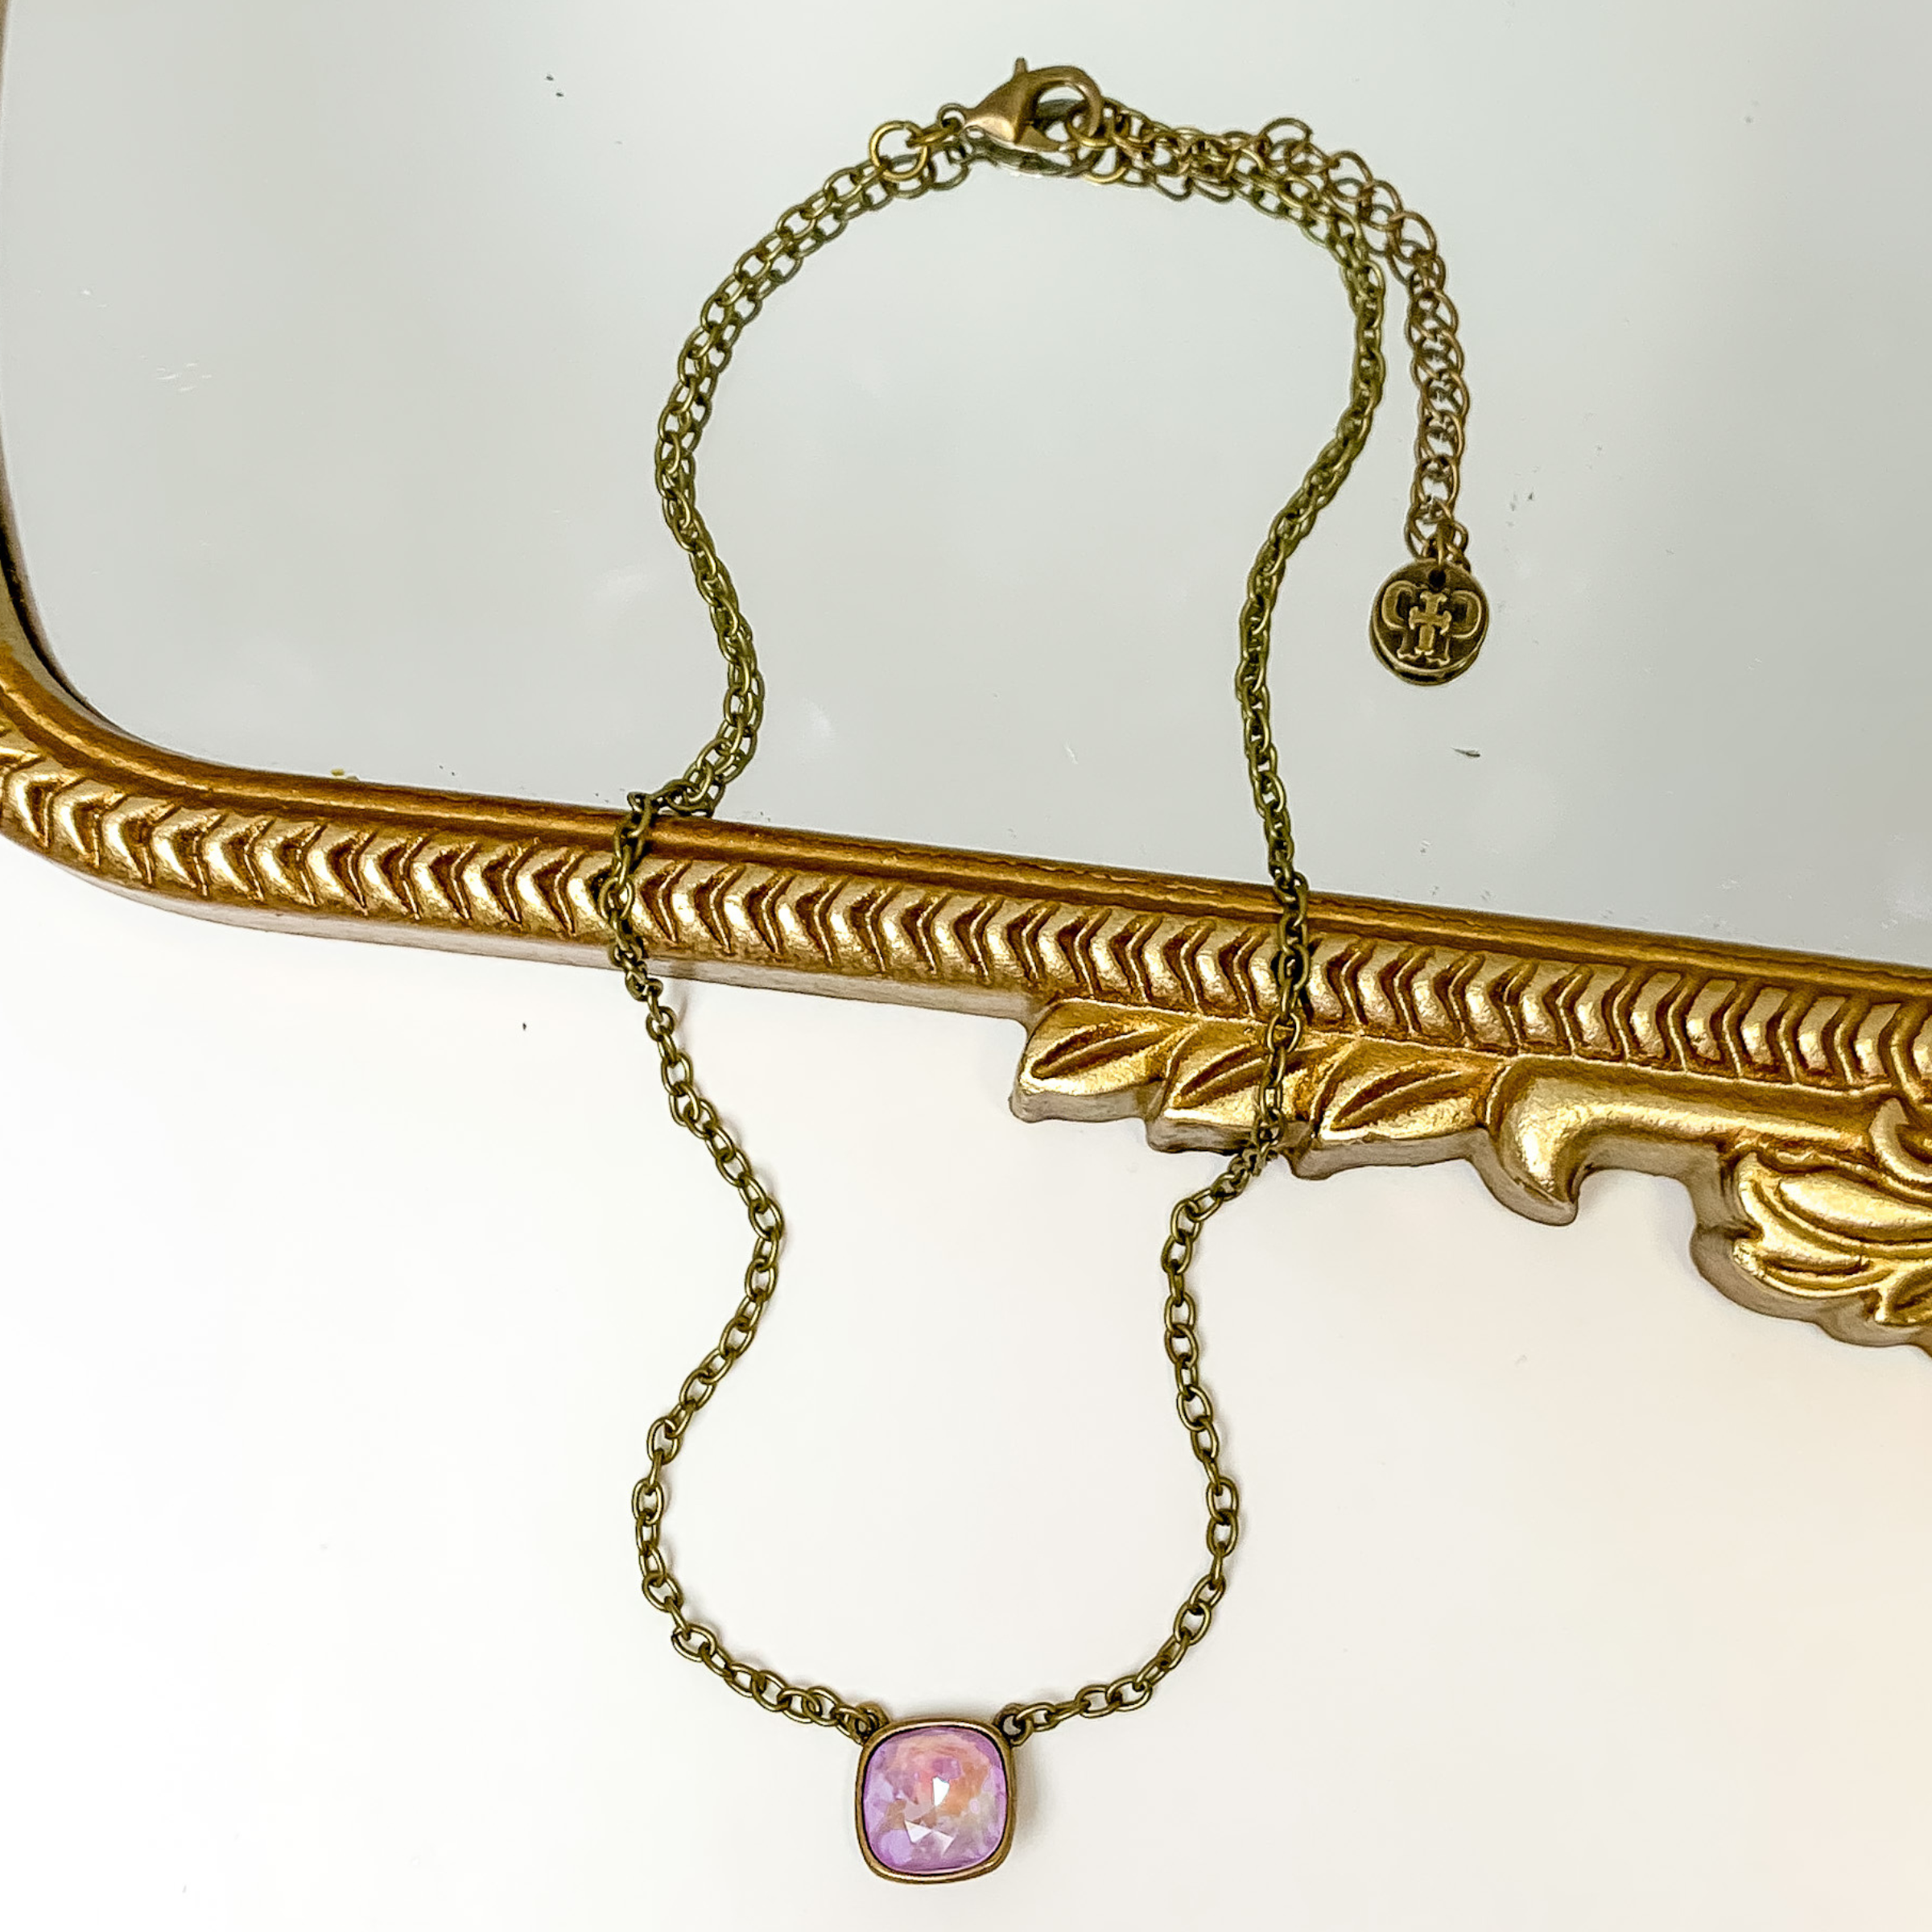 Bronze chain necklace with a lavender cushion cut crystal. This necklace is pictured partially laying on a gold mirror on a white background.